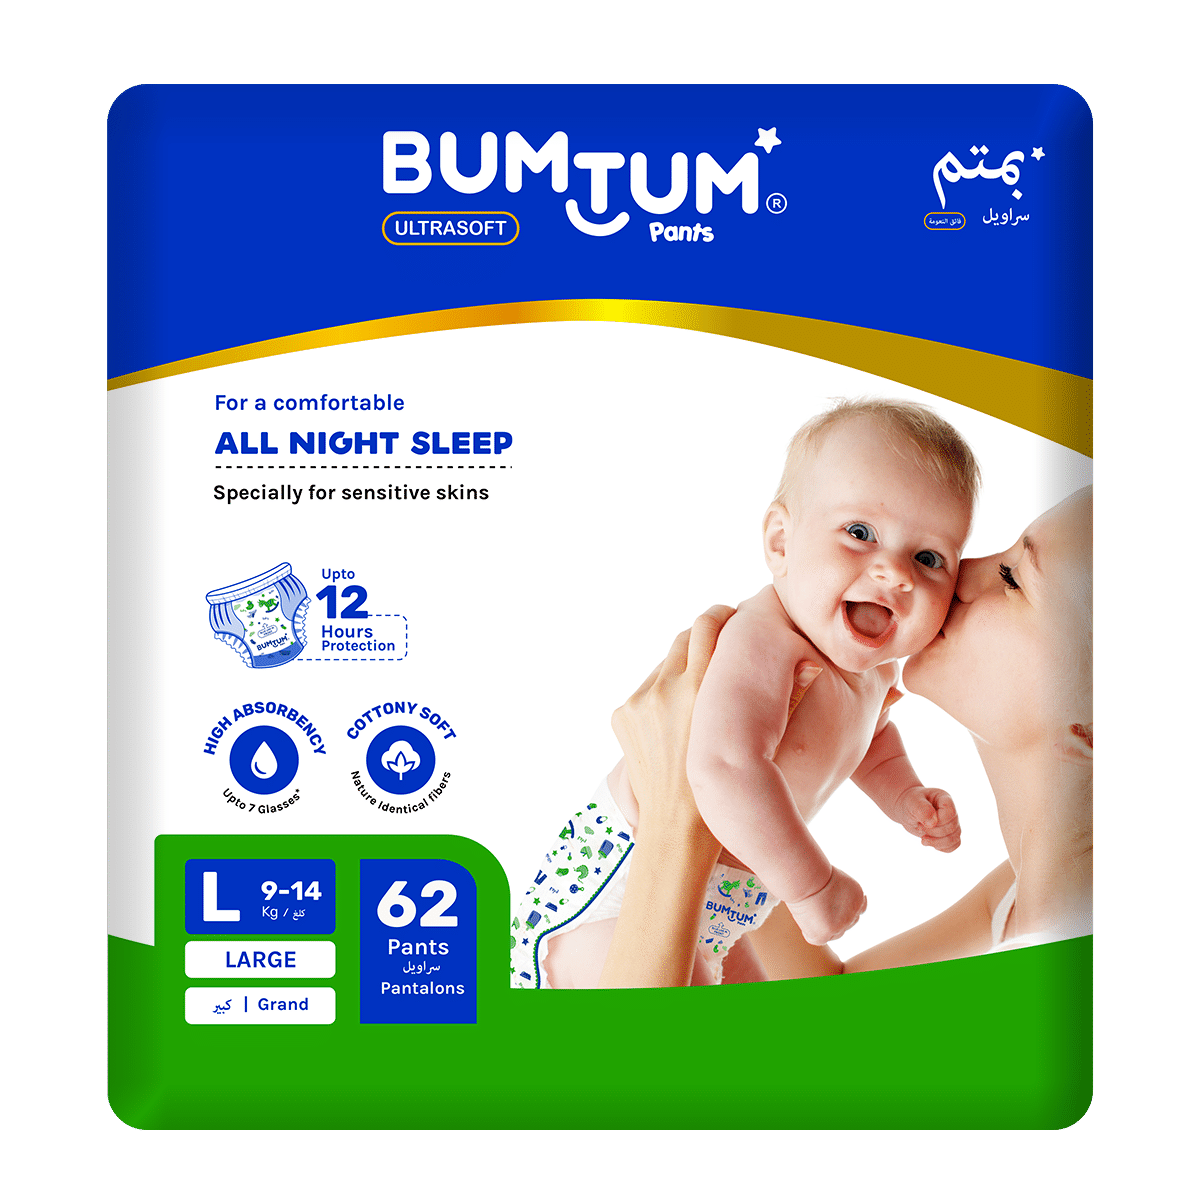 Buy Best Diaper Pants Online for Babies at Affordable Prices in India |  LuvLap